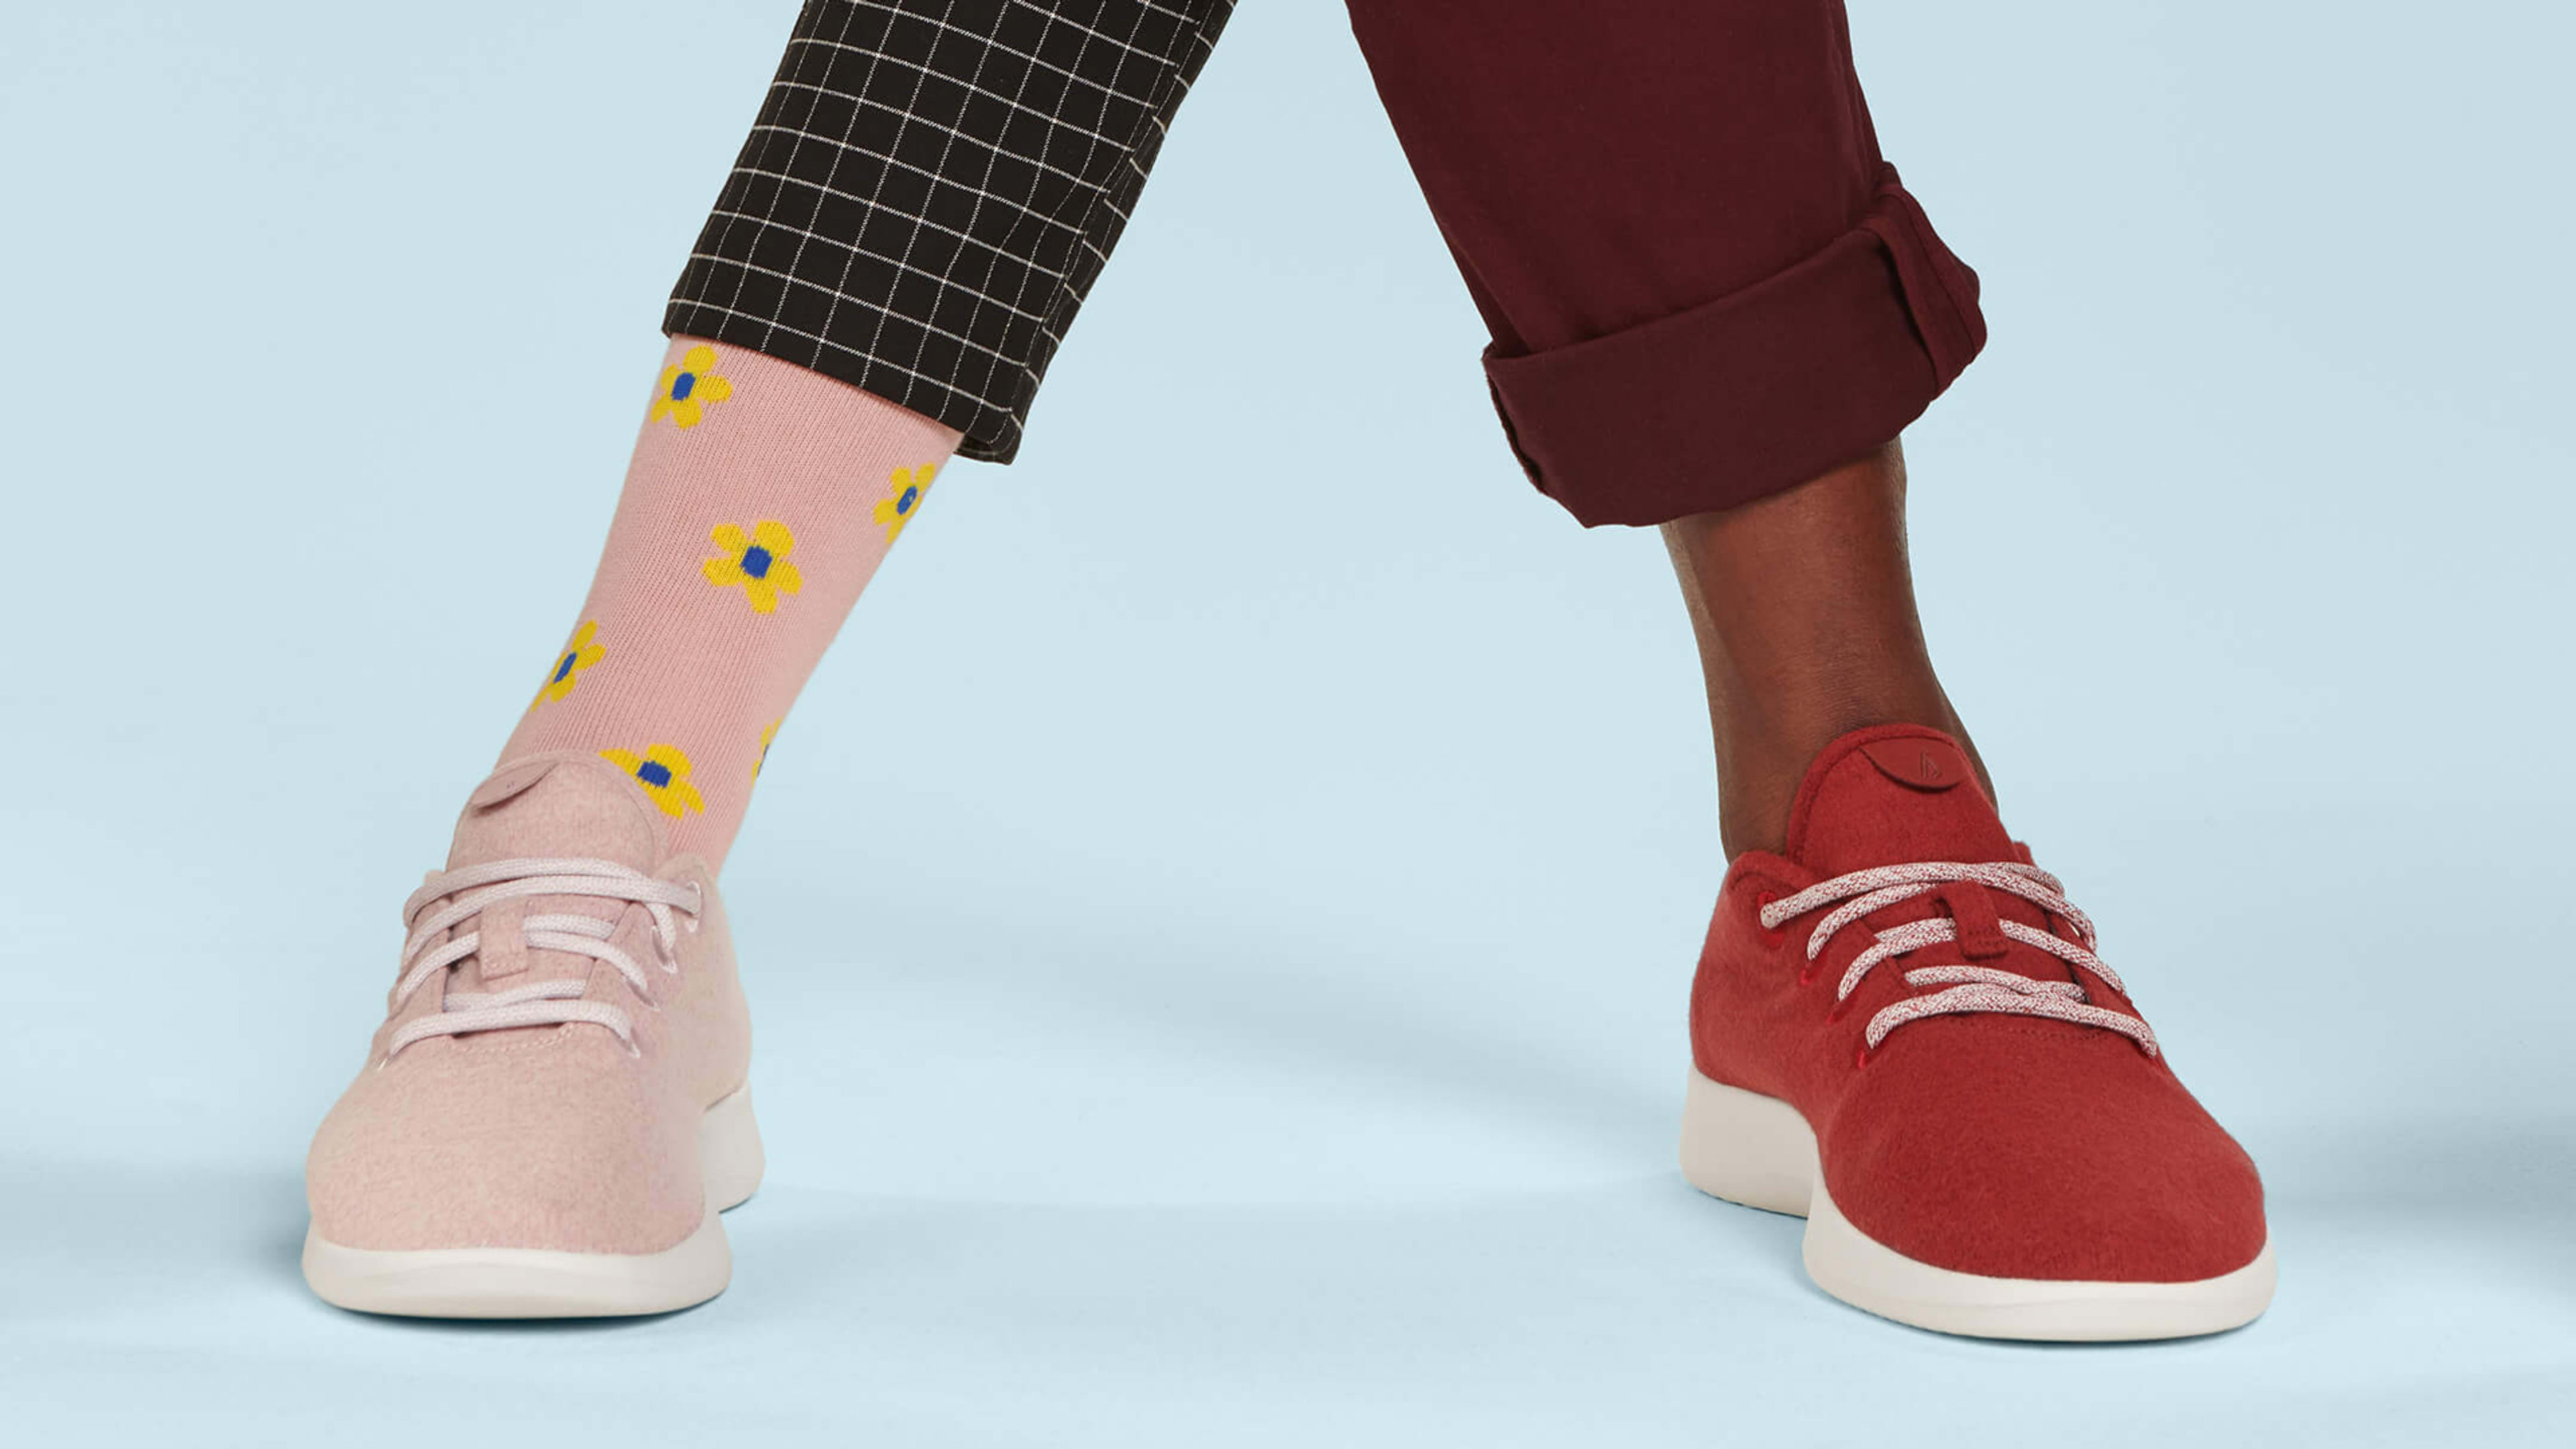 Allbirds will bring some eco-friendly sneakers into the world with $50M in new funding